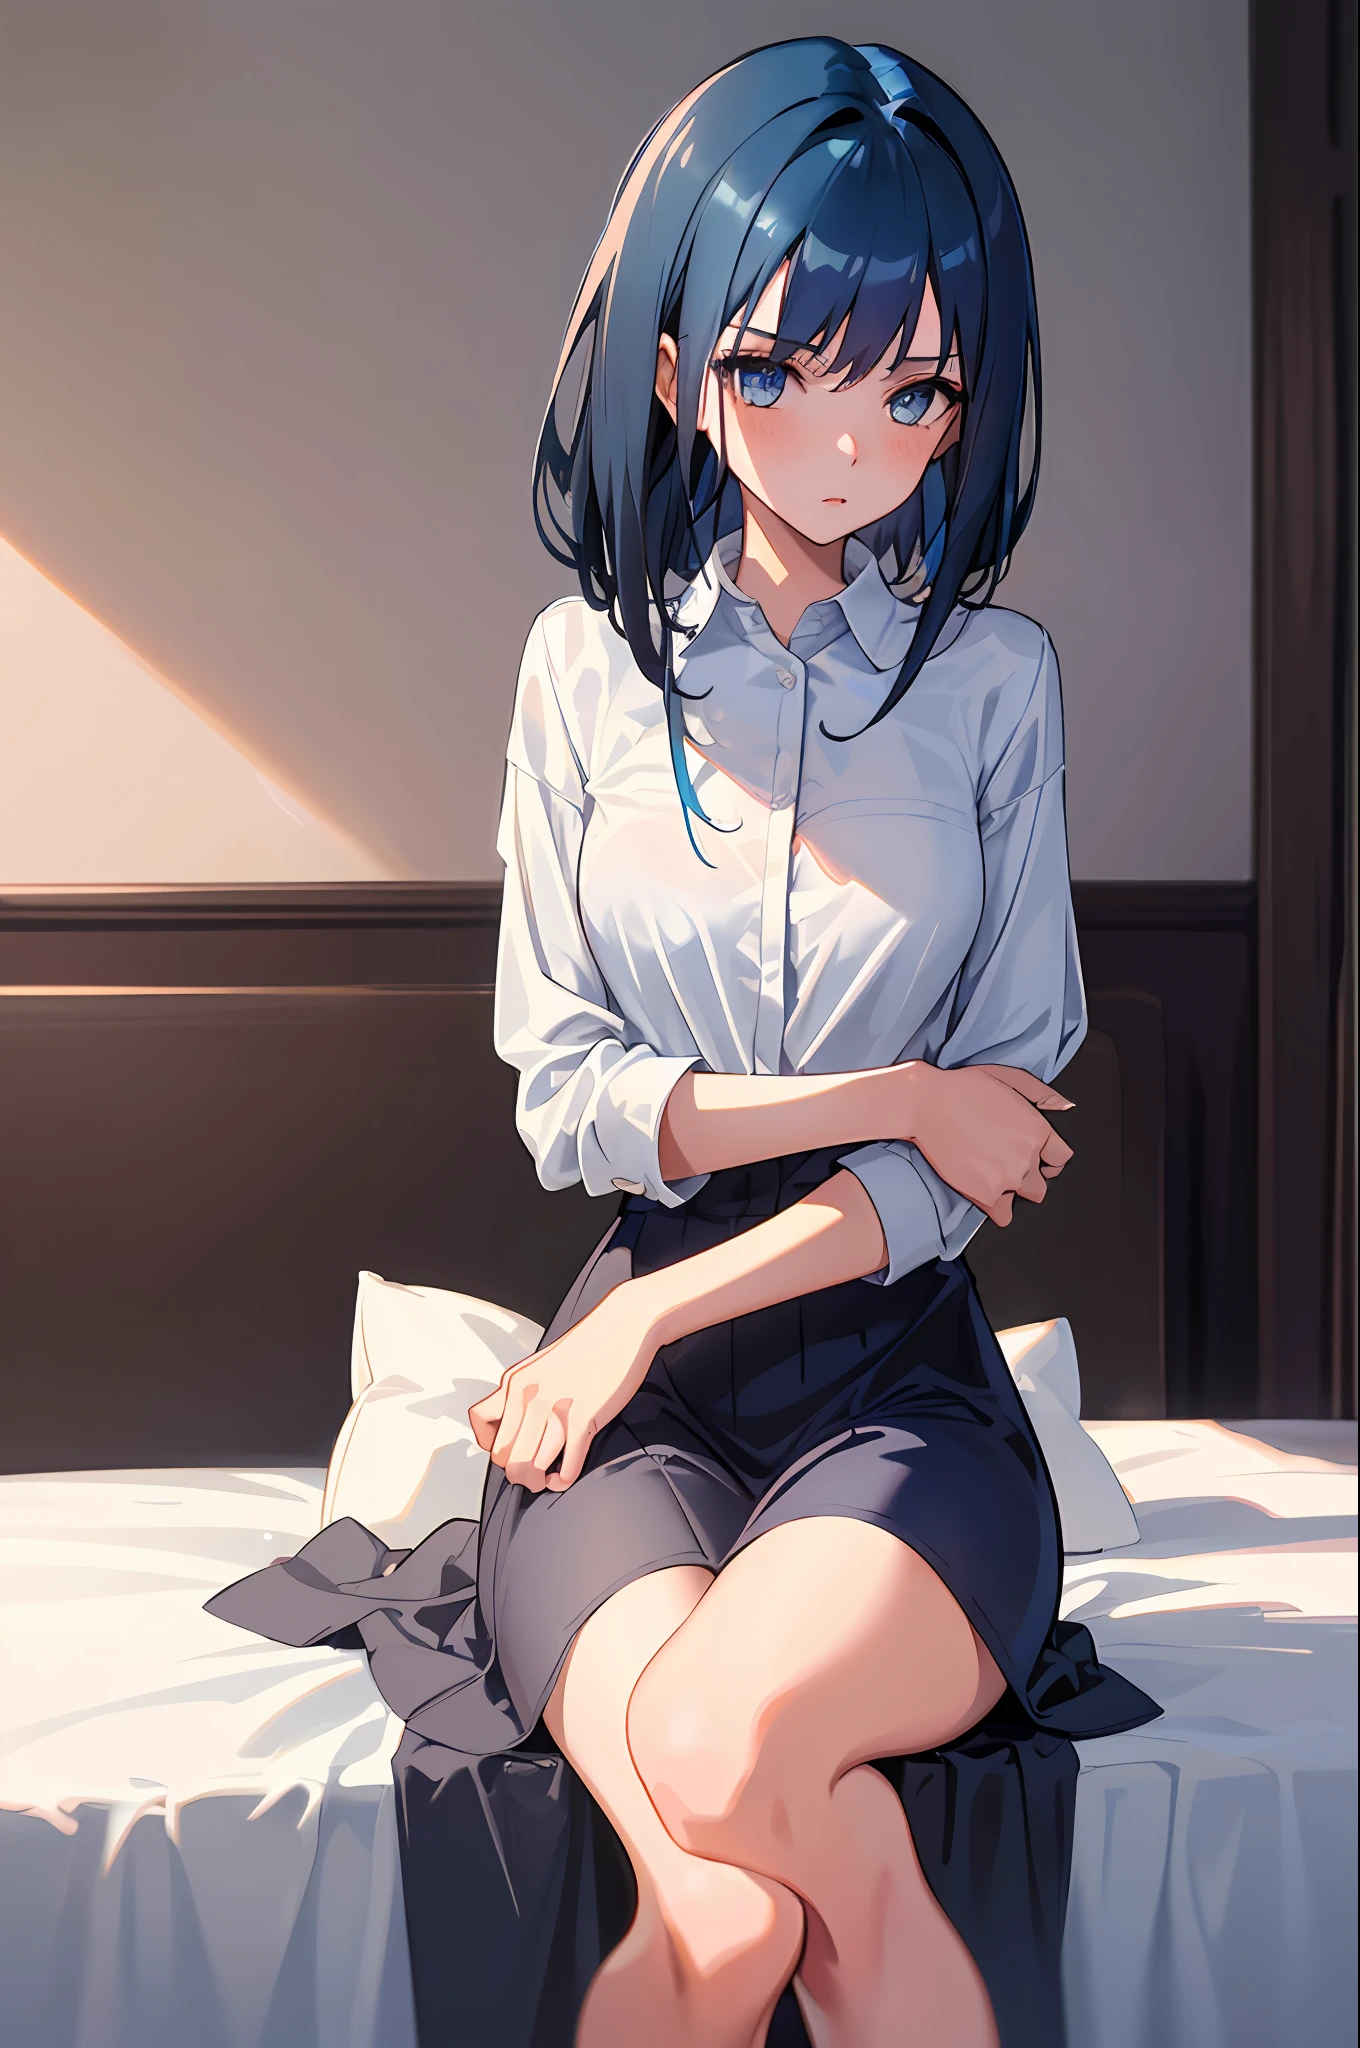 (((1 girl)), ray tracing, (dim lighting), [Detail background (bedroom)), (((dark blue hair)), ((Dark blue hair), (Fluffy dark blue hair, slender girl))) Short hair))) Avoid golden eyes in a sinister bedroom ((Naked oversized shirt)), sitting, showing hands between legs, blushing, delicate slim figure and graceful curves, medium breasts